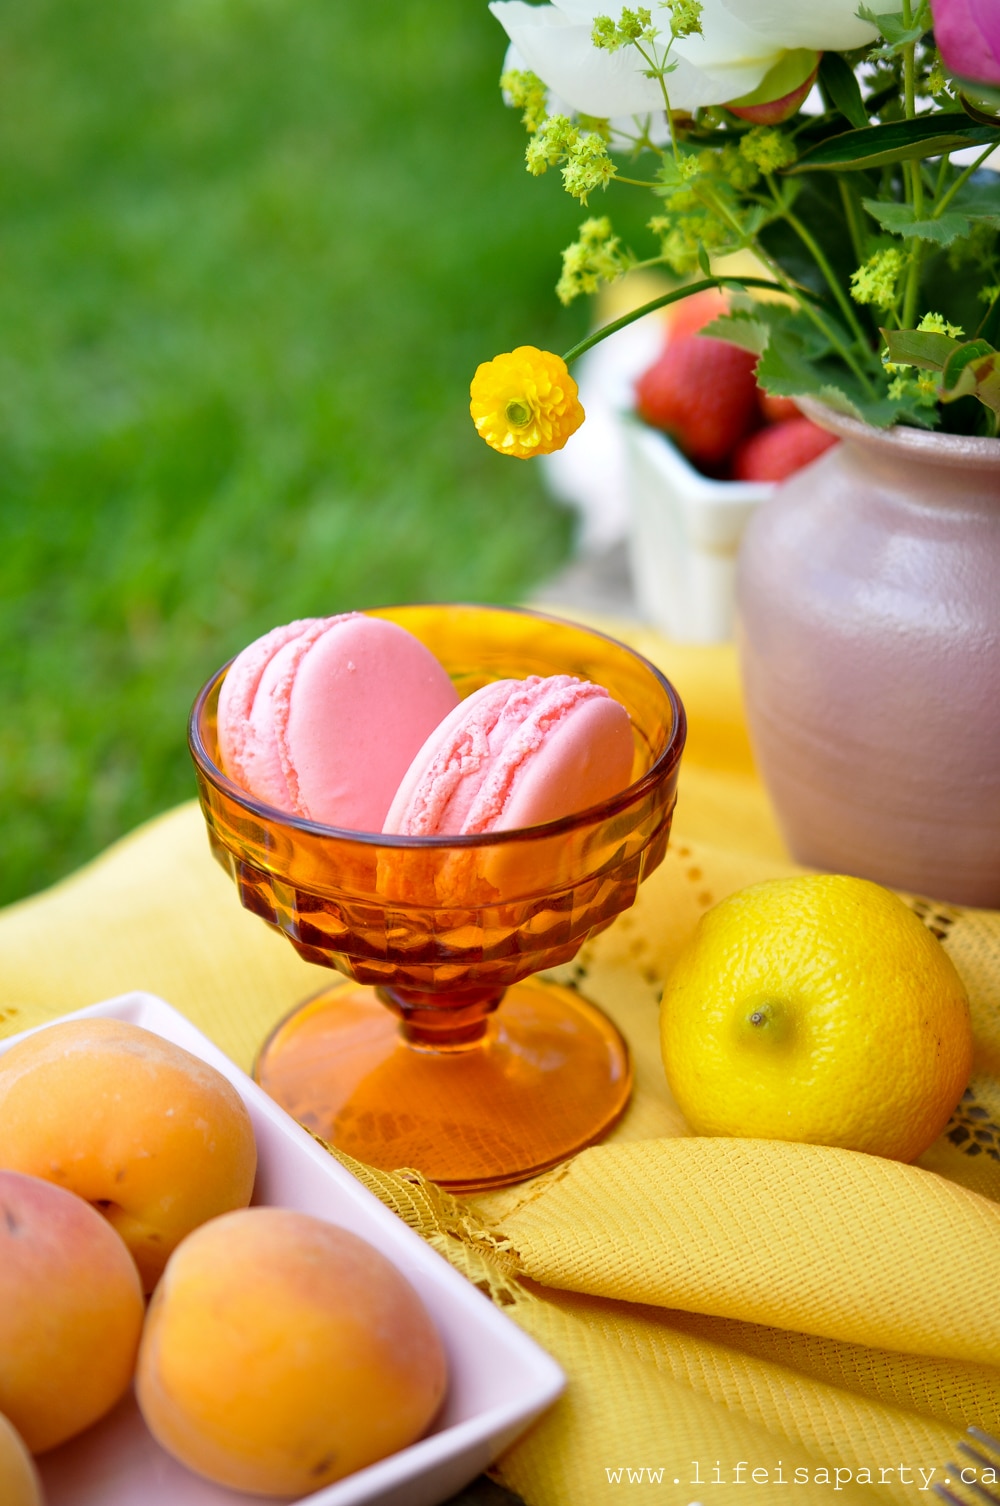 Pink macaroons in a amber glass dessert bowl.